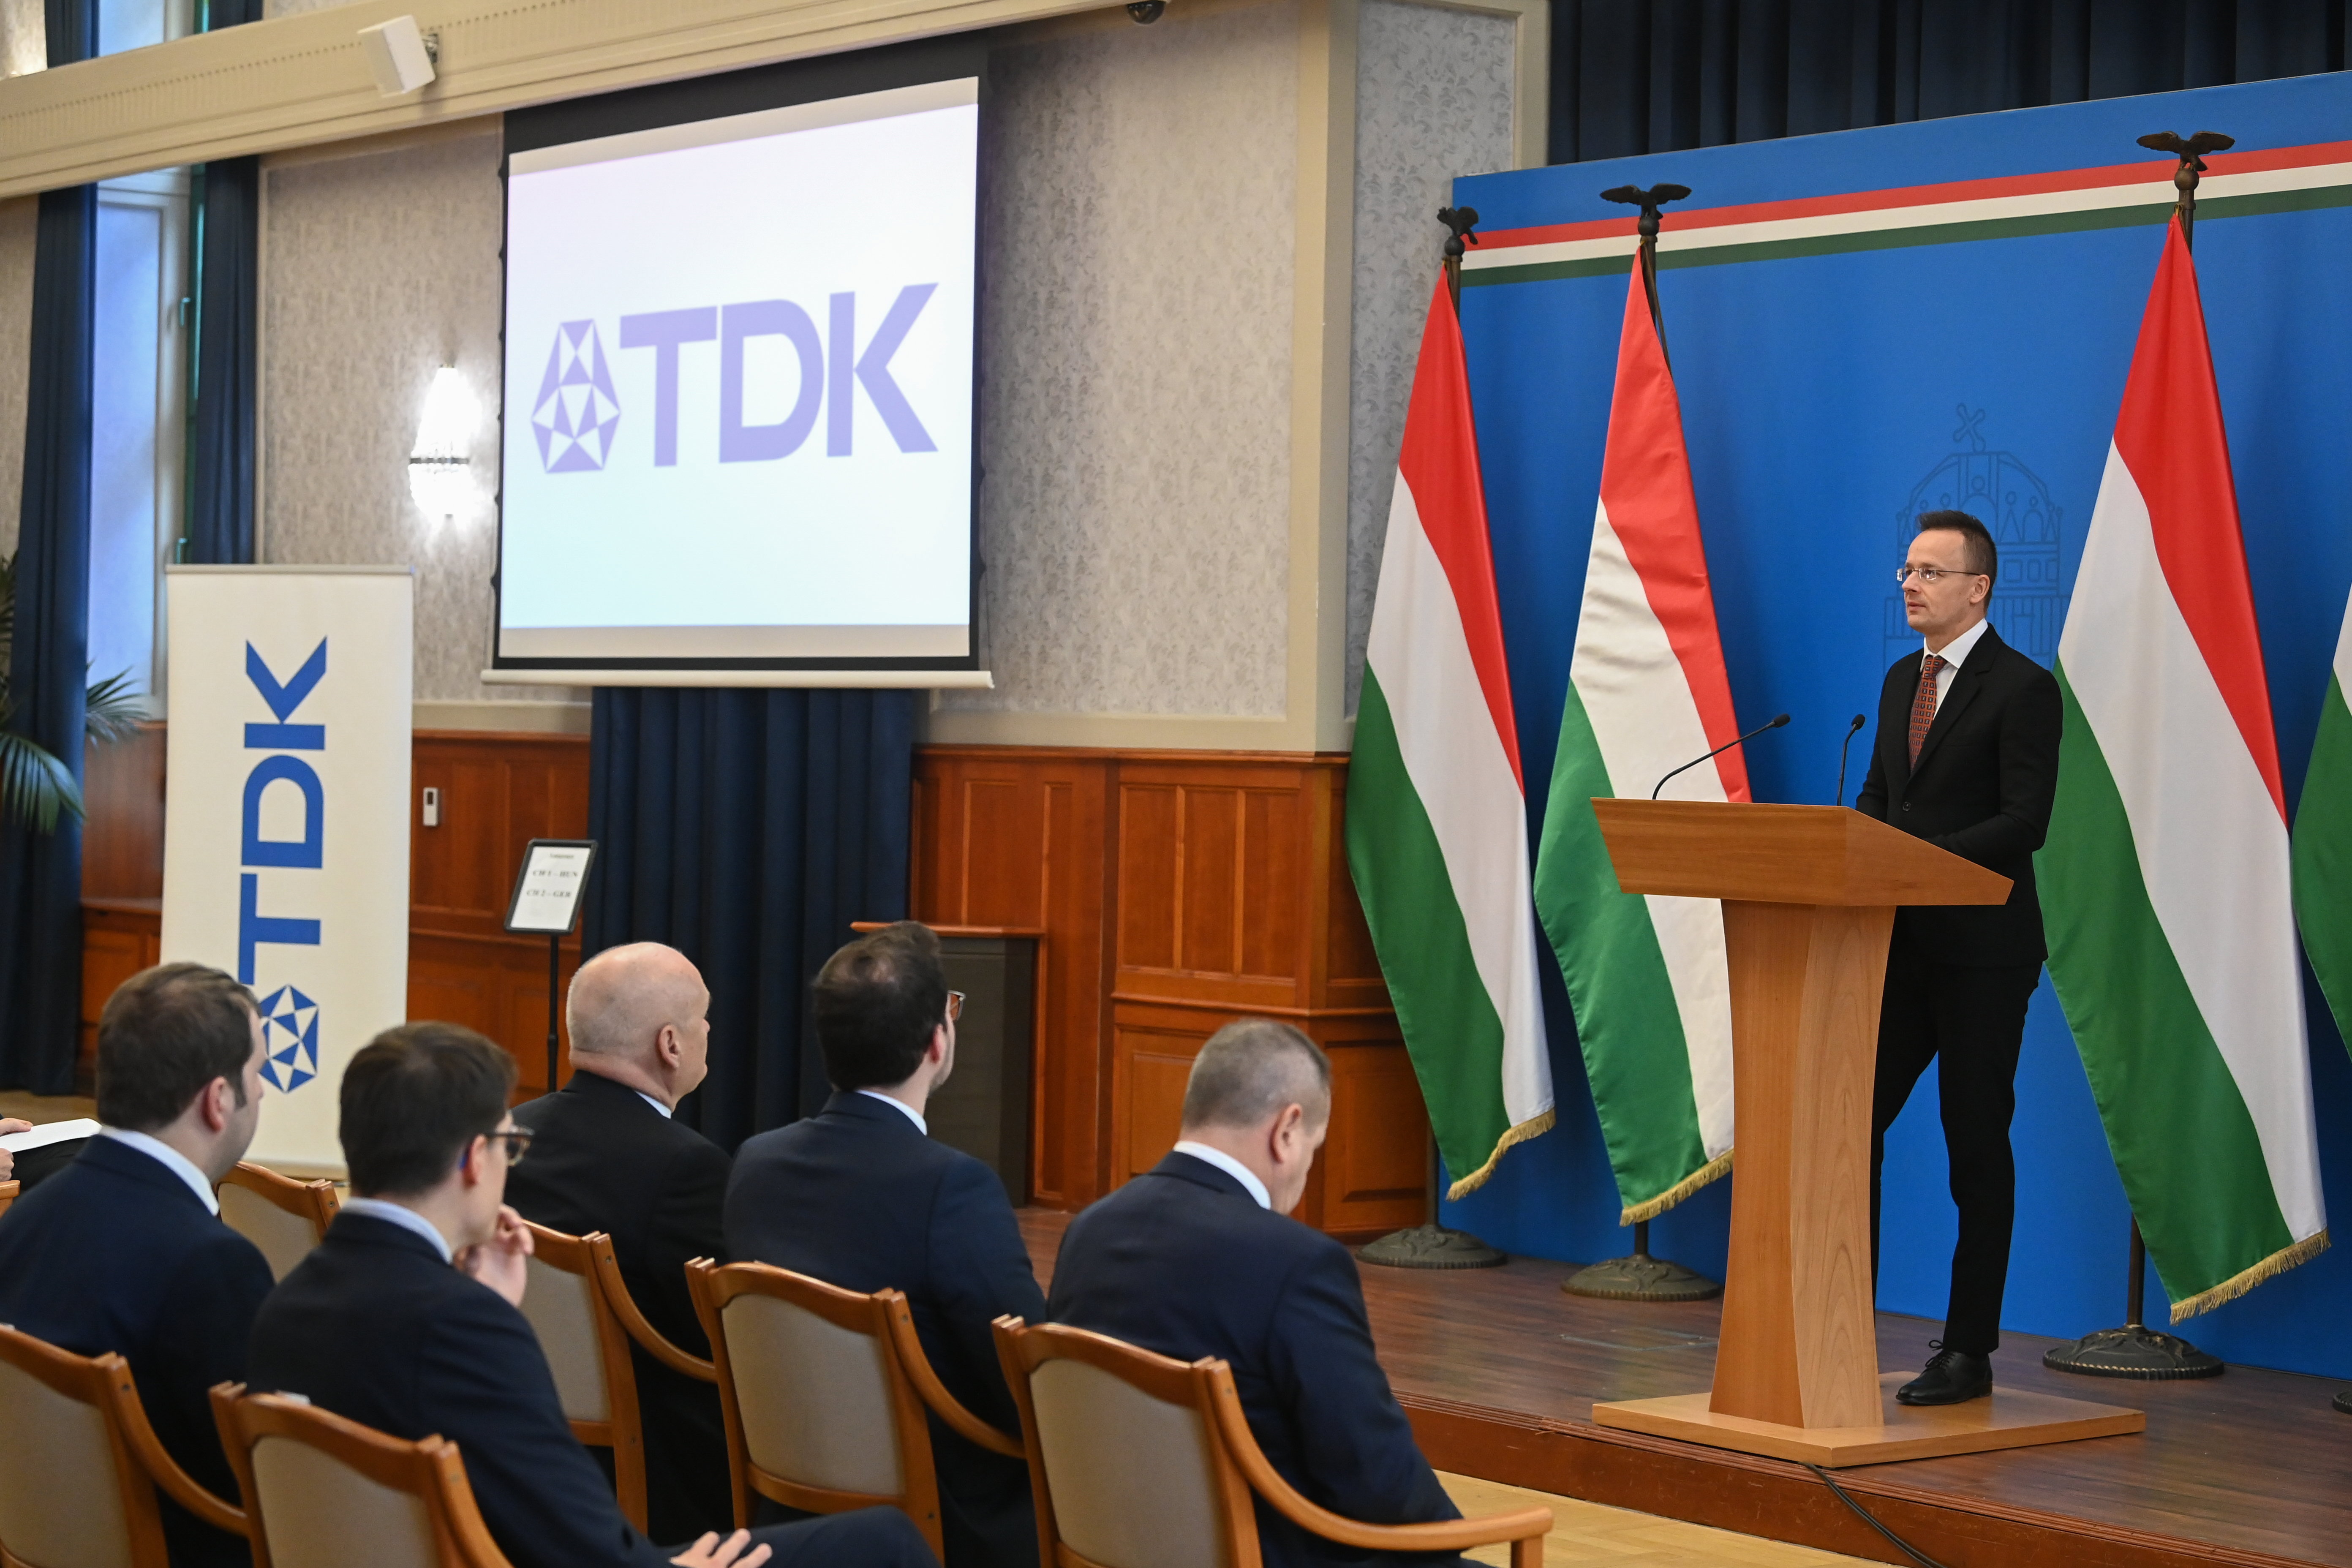 TDK Hungary Components Investing HUF 3.5 bln in Energy Upgra...